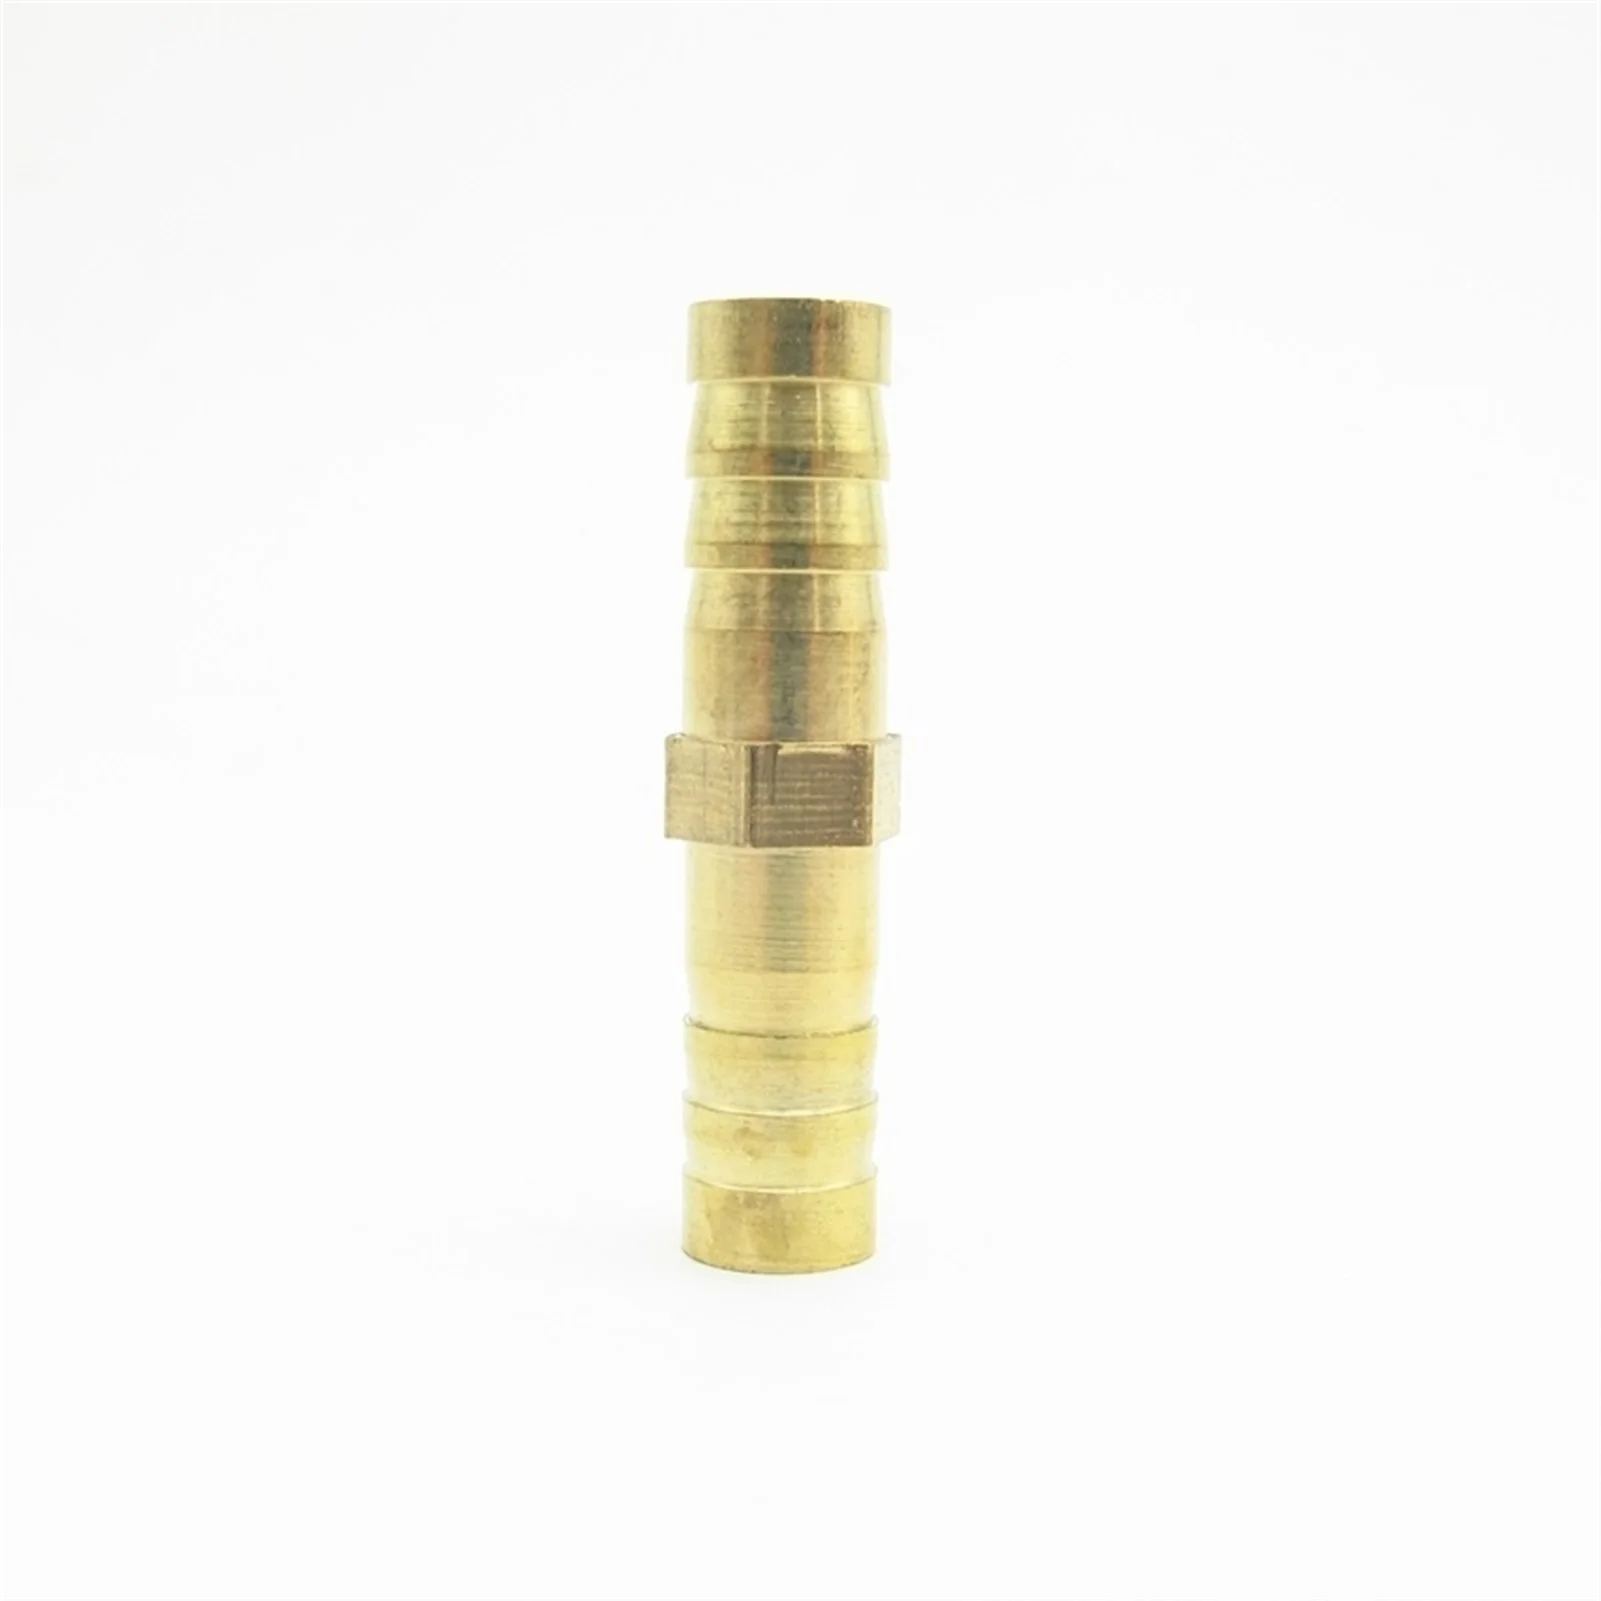 

Straight 2 Way Brass Barbed Pipe Fitting Coupler Connector Adapter, 4mm 5mm 6mm 8mm 10mm 12mm 14mm 16mm 19mm 25mm Hose Barb